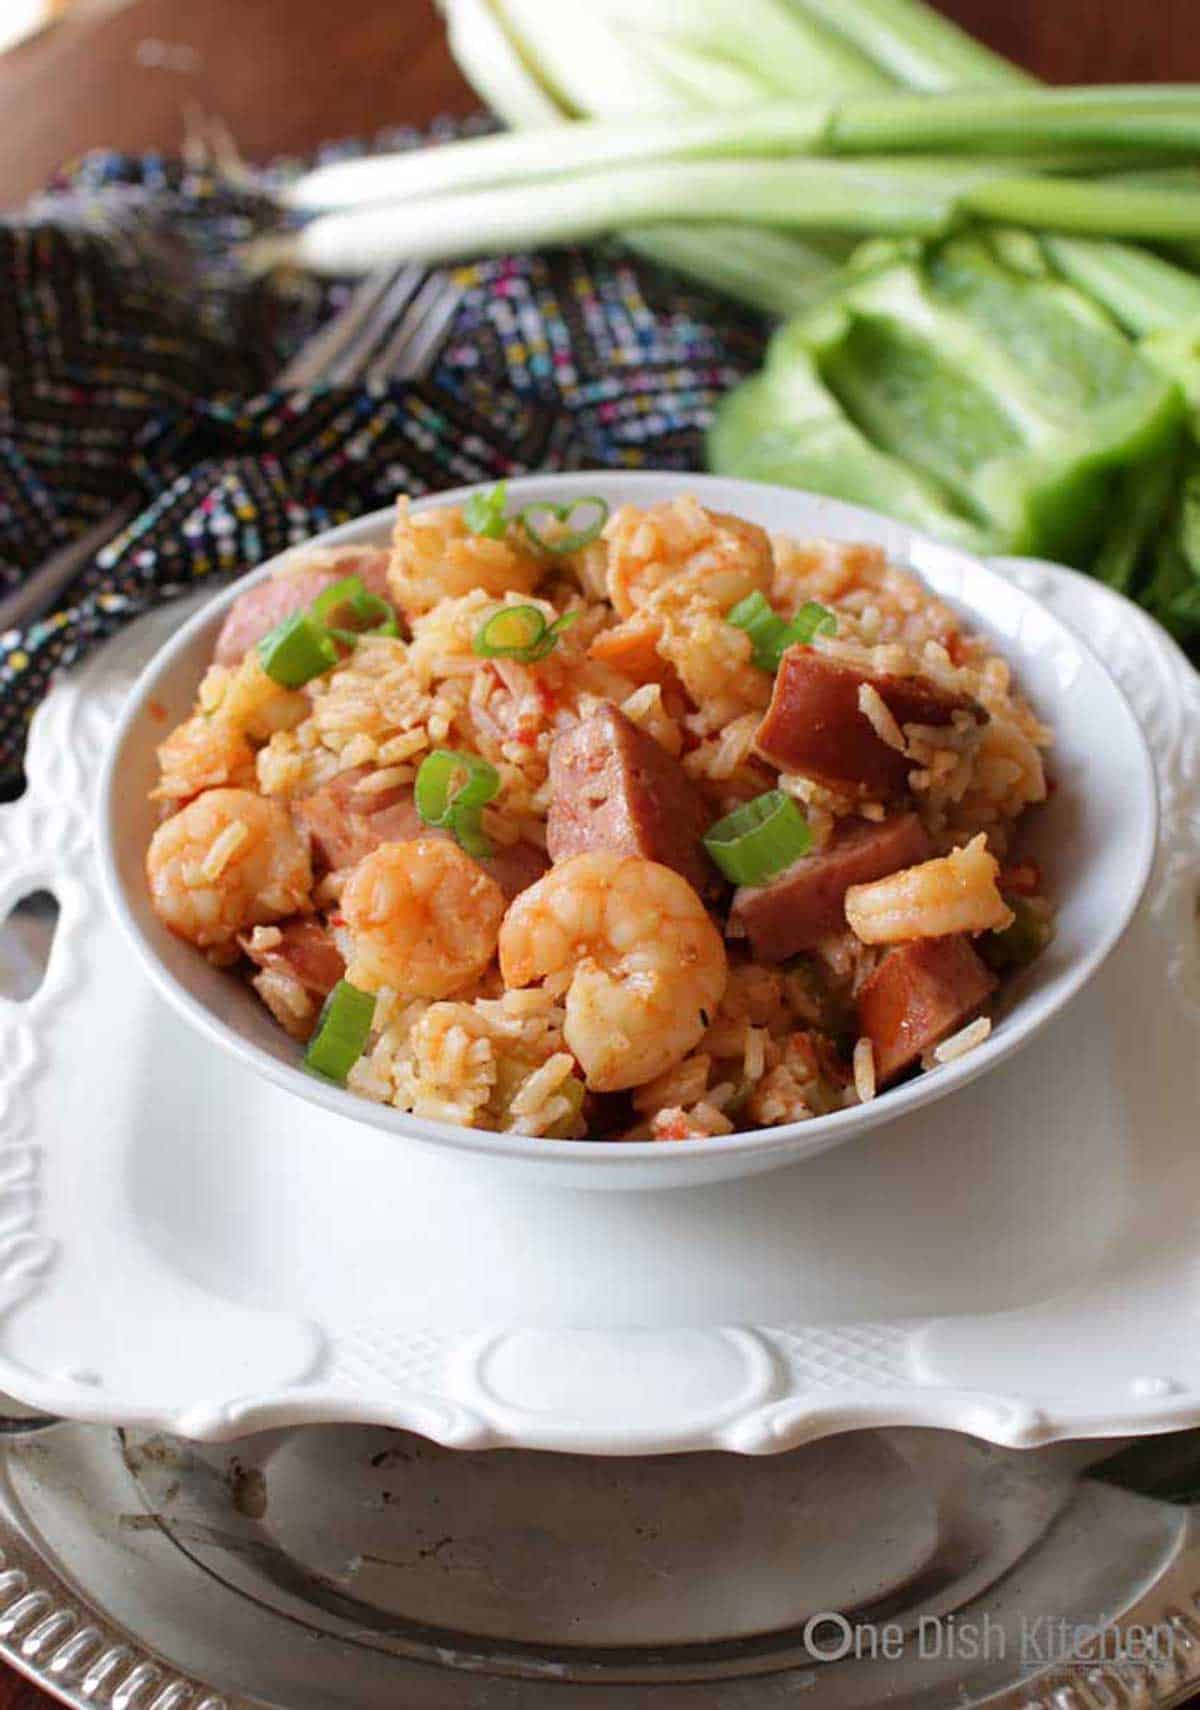 Shrimp and sausage jambalaya in a bowl with onions, celery, and green bell peppers in the background.